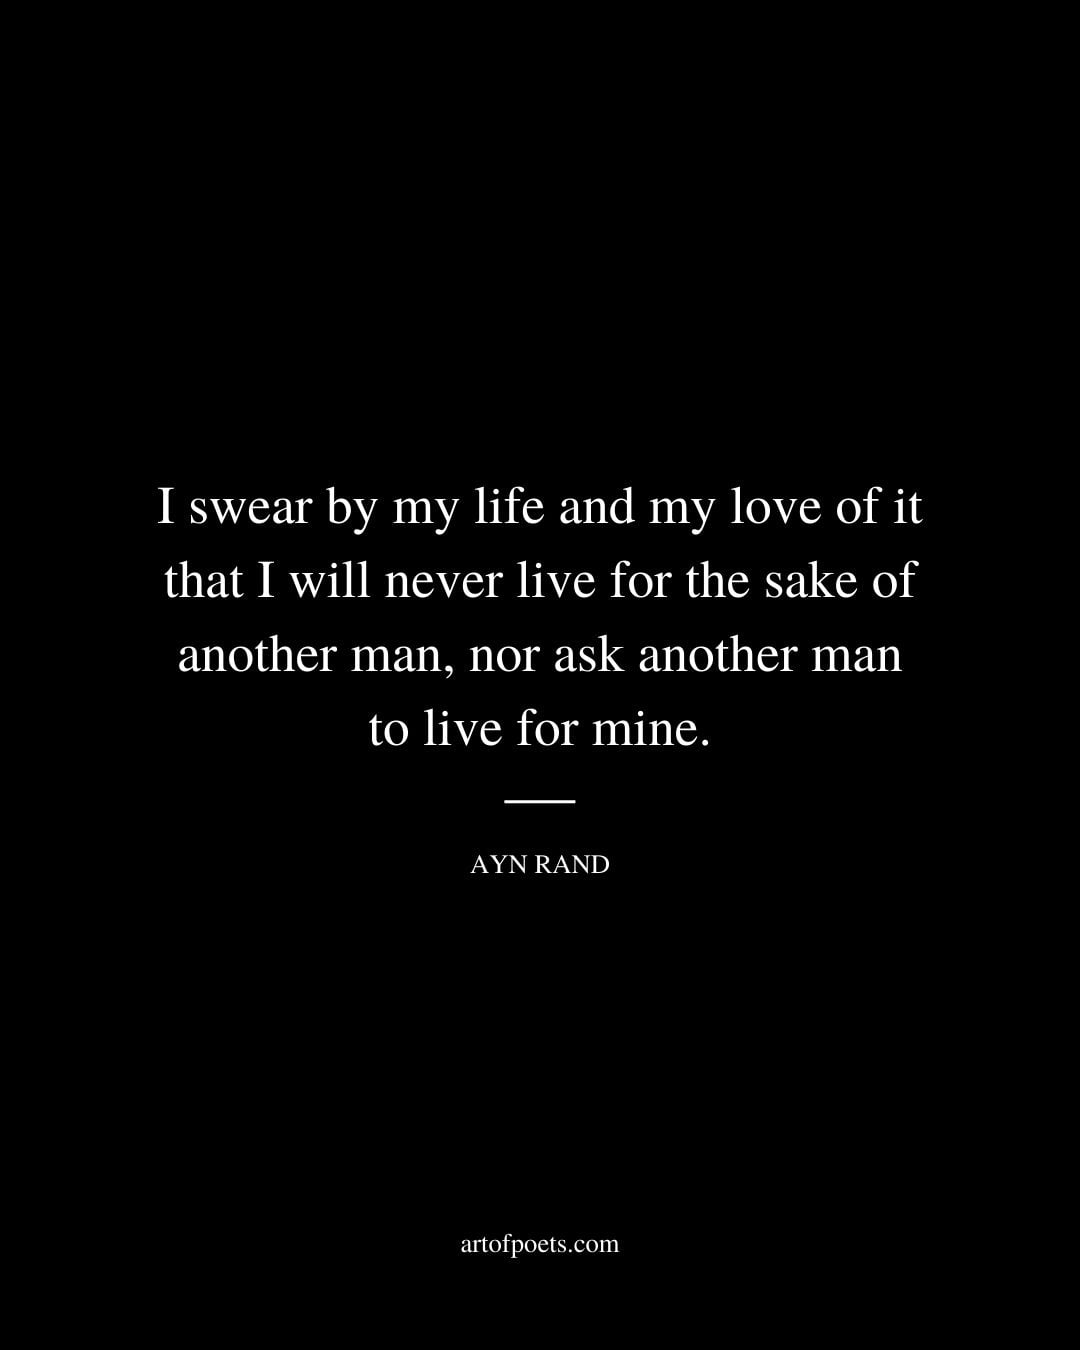 I swear by my life and my love of it that I will never live for the sake of another man nor ask another man to live for mine